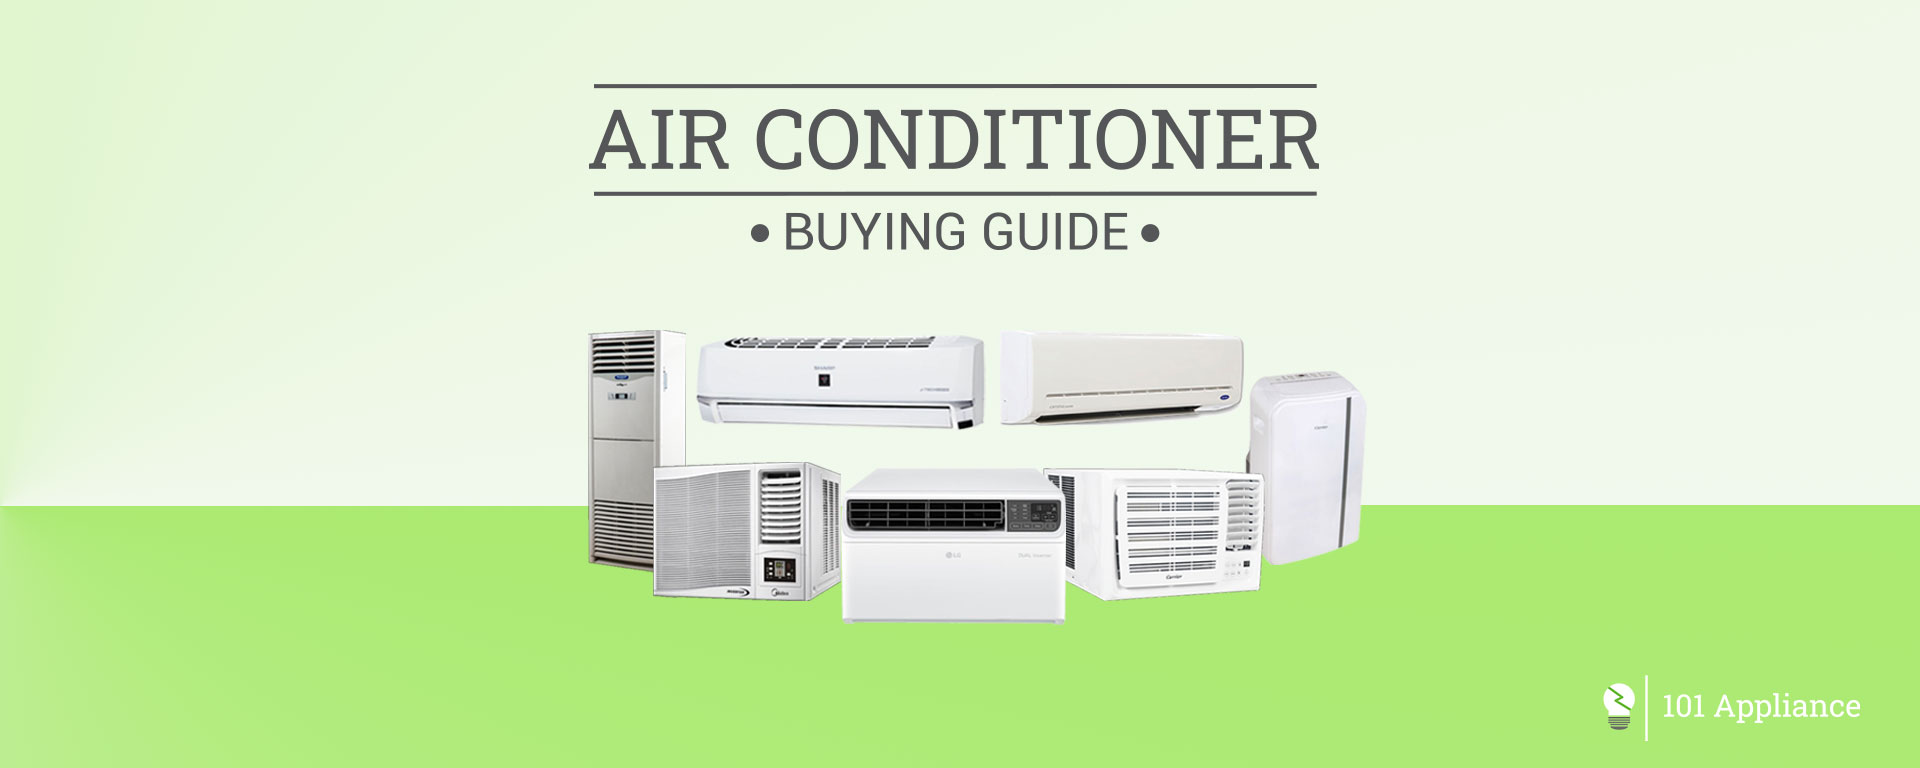 aircon buying guide